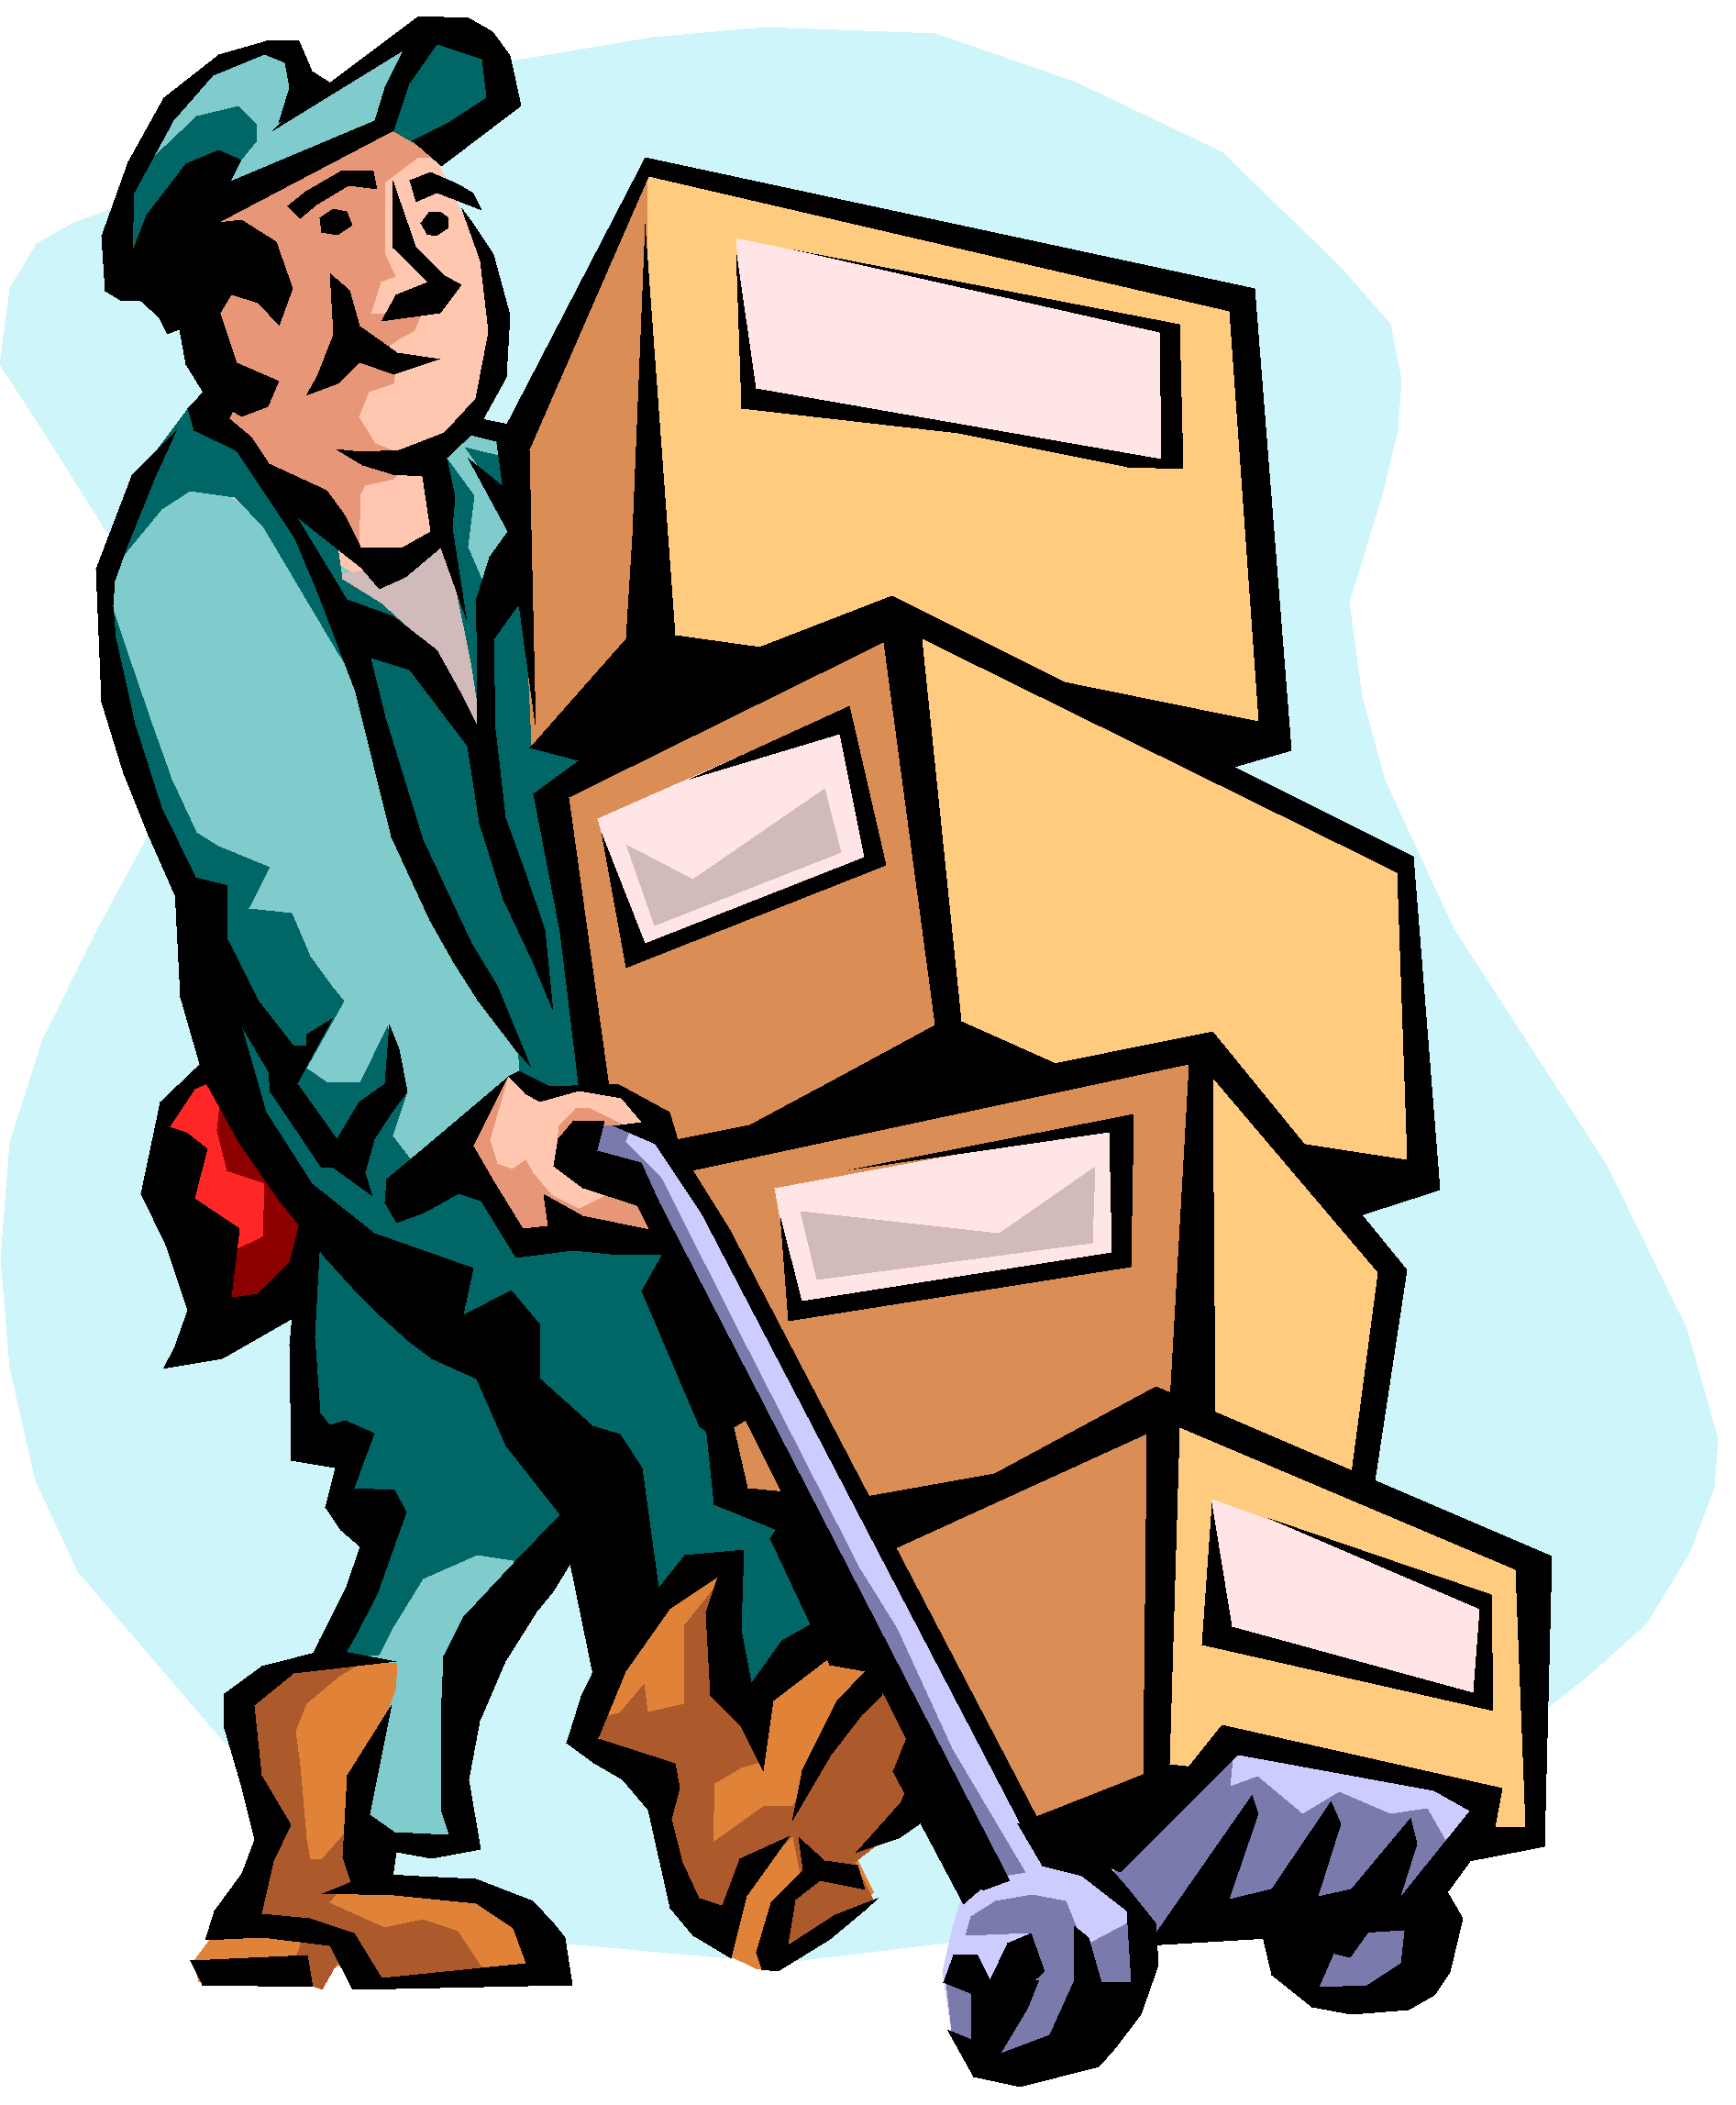 Moving Boxes Clipart